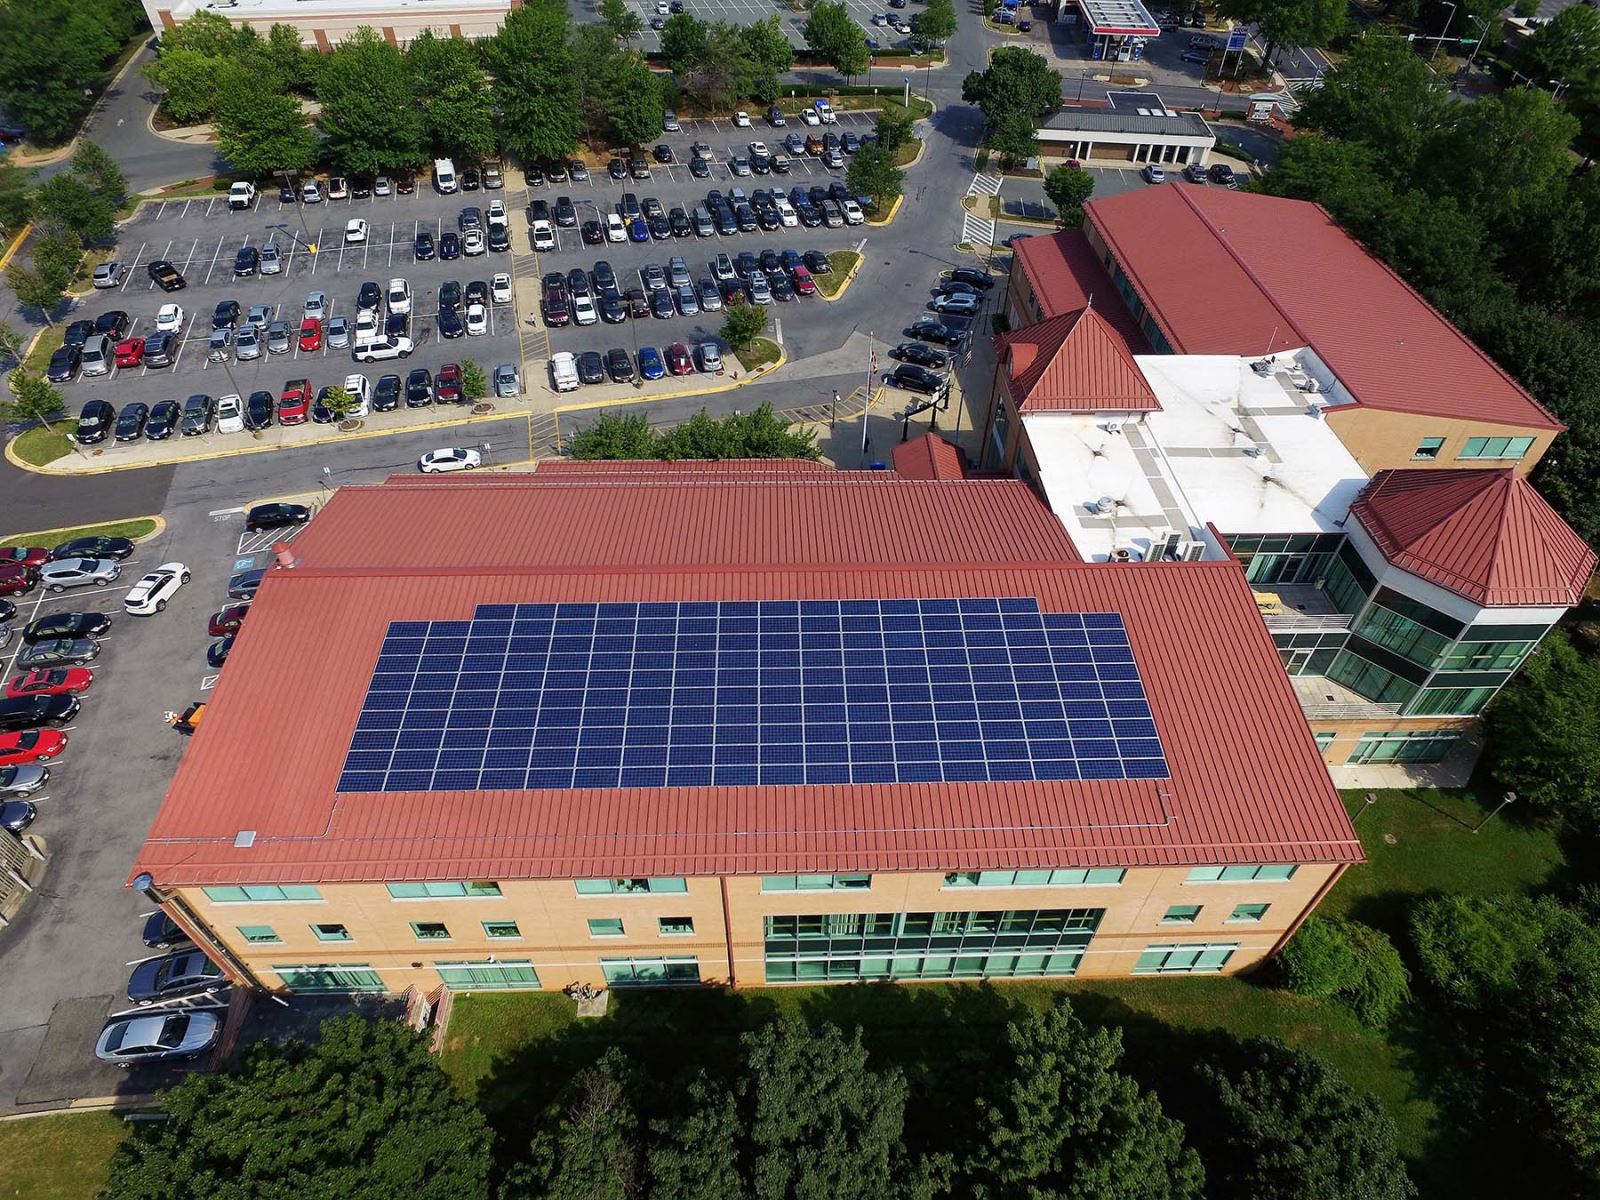 Solar Panels at Upcounty Regional Services Center